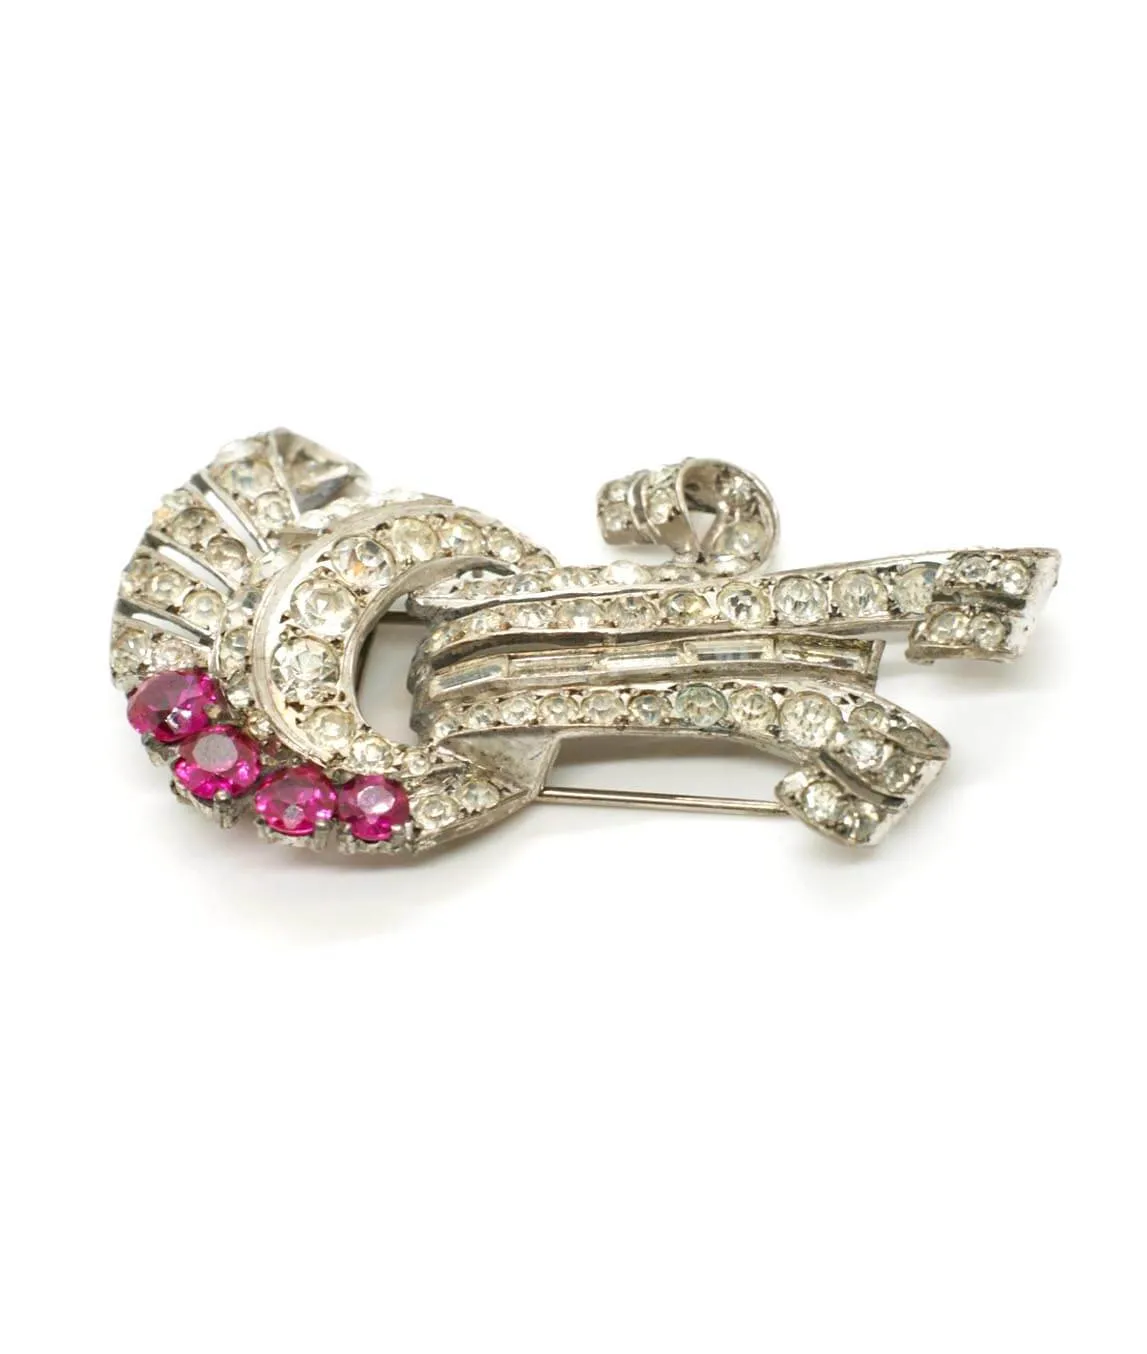 Pink and clear vintage brooch